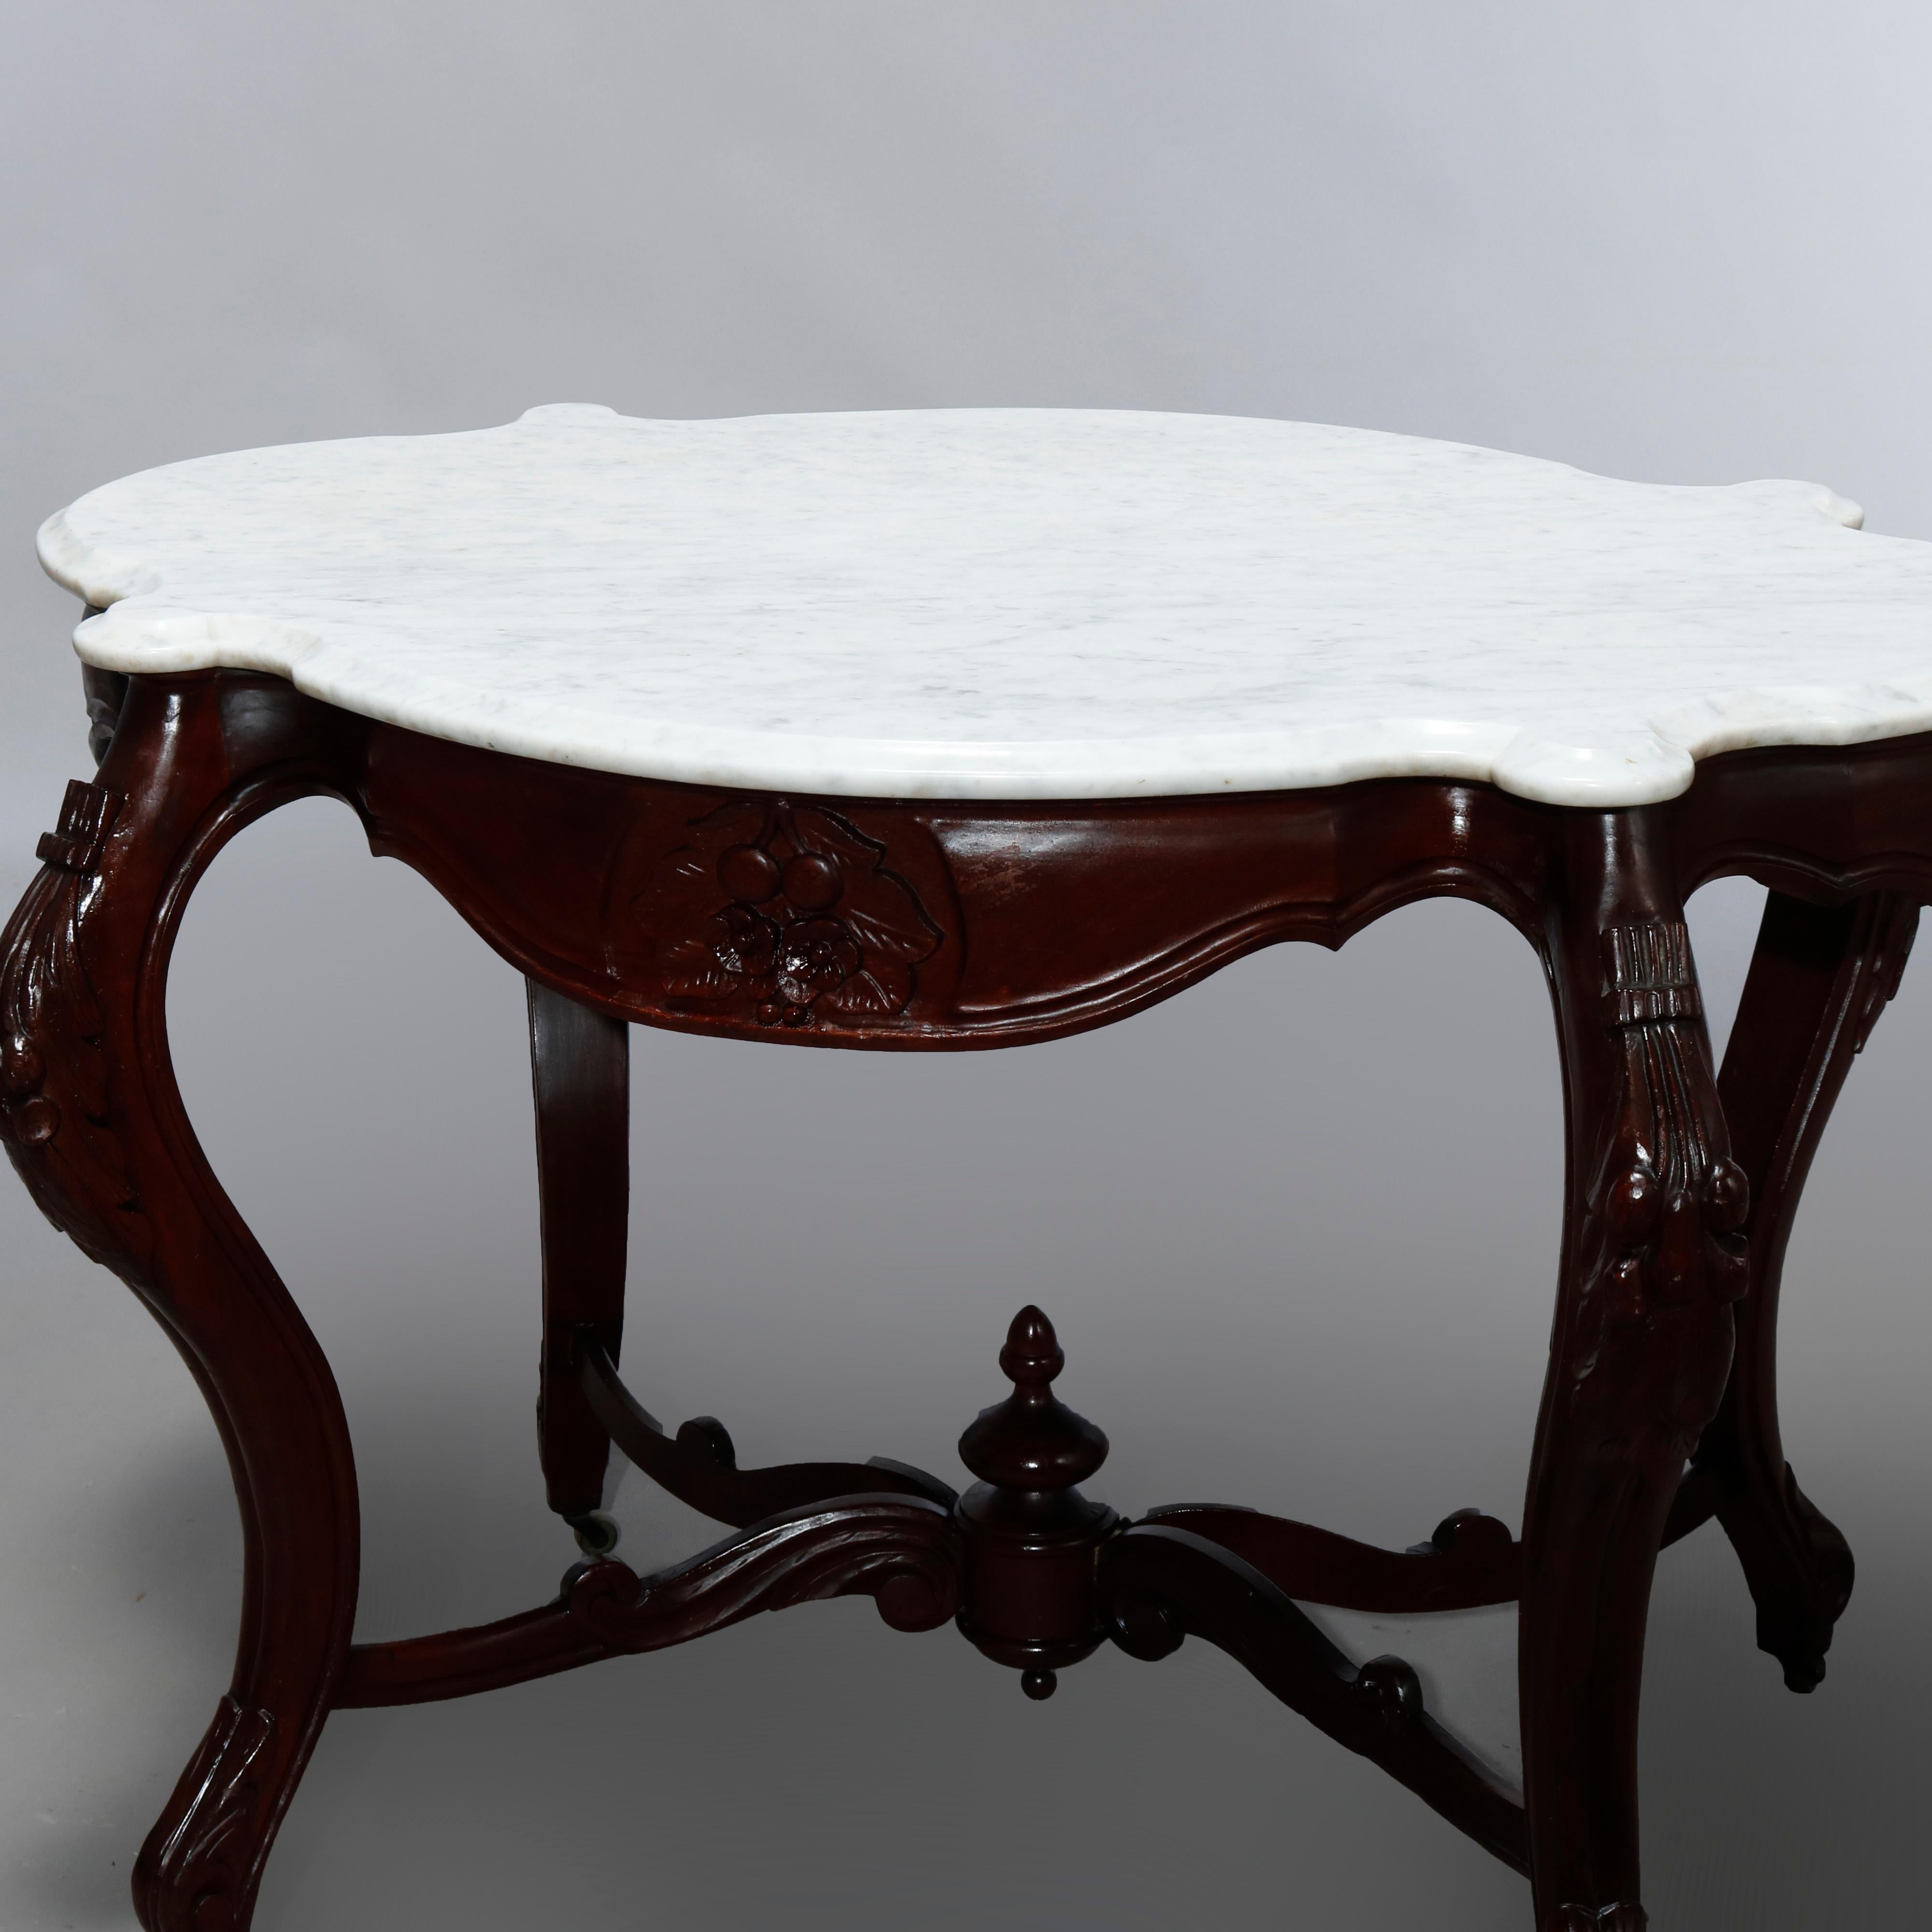 An antique Rococo Revival turtle top center table offers shaped marble top over walnut base having skirt with carved fruit and foliate reserve and raised on cabriole legs with scroll form stretcher and center urn finial, c1870

Measures: 29.75